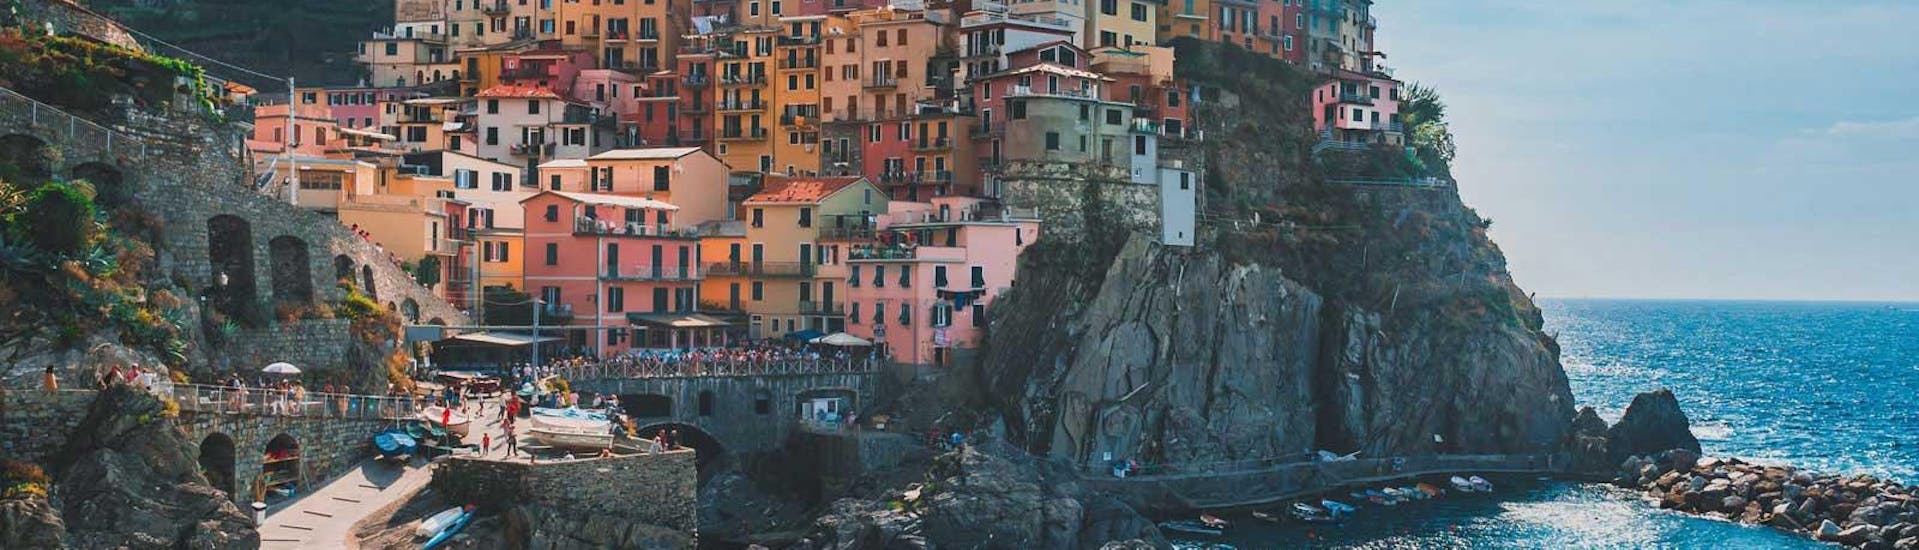 A view of the coast of Cinque Terre seen during a trip with Venere Boat Tour Cinque Terre.